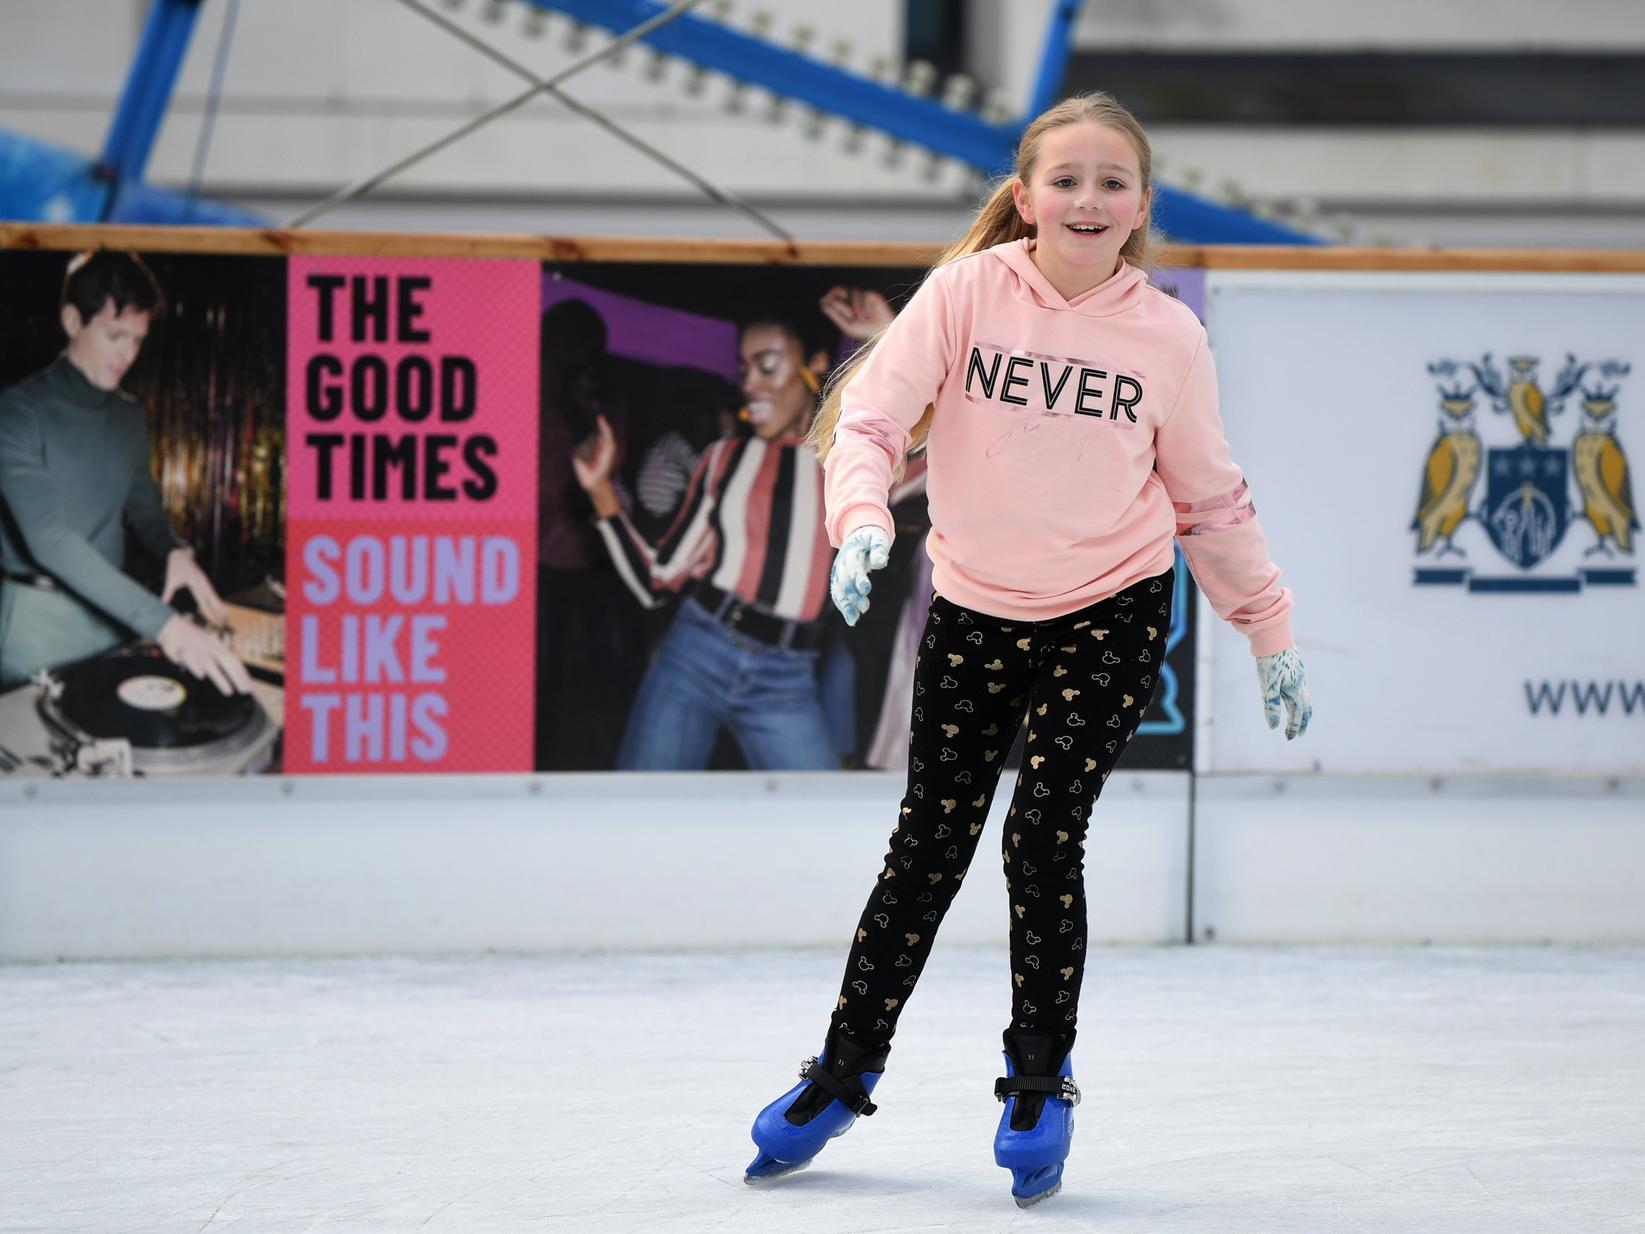 Ice Cube is back transforming Leeds Millennium Square into an ice skating rink with family fun rides. It's open now until Sunday 23. Public skating sessions last 45 minutes and children can book one-to-one training sessions.